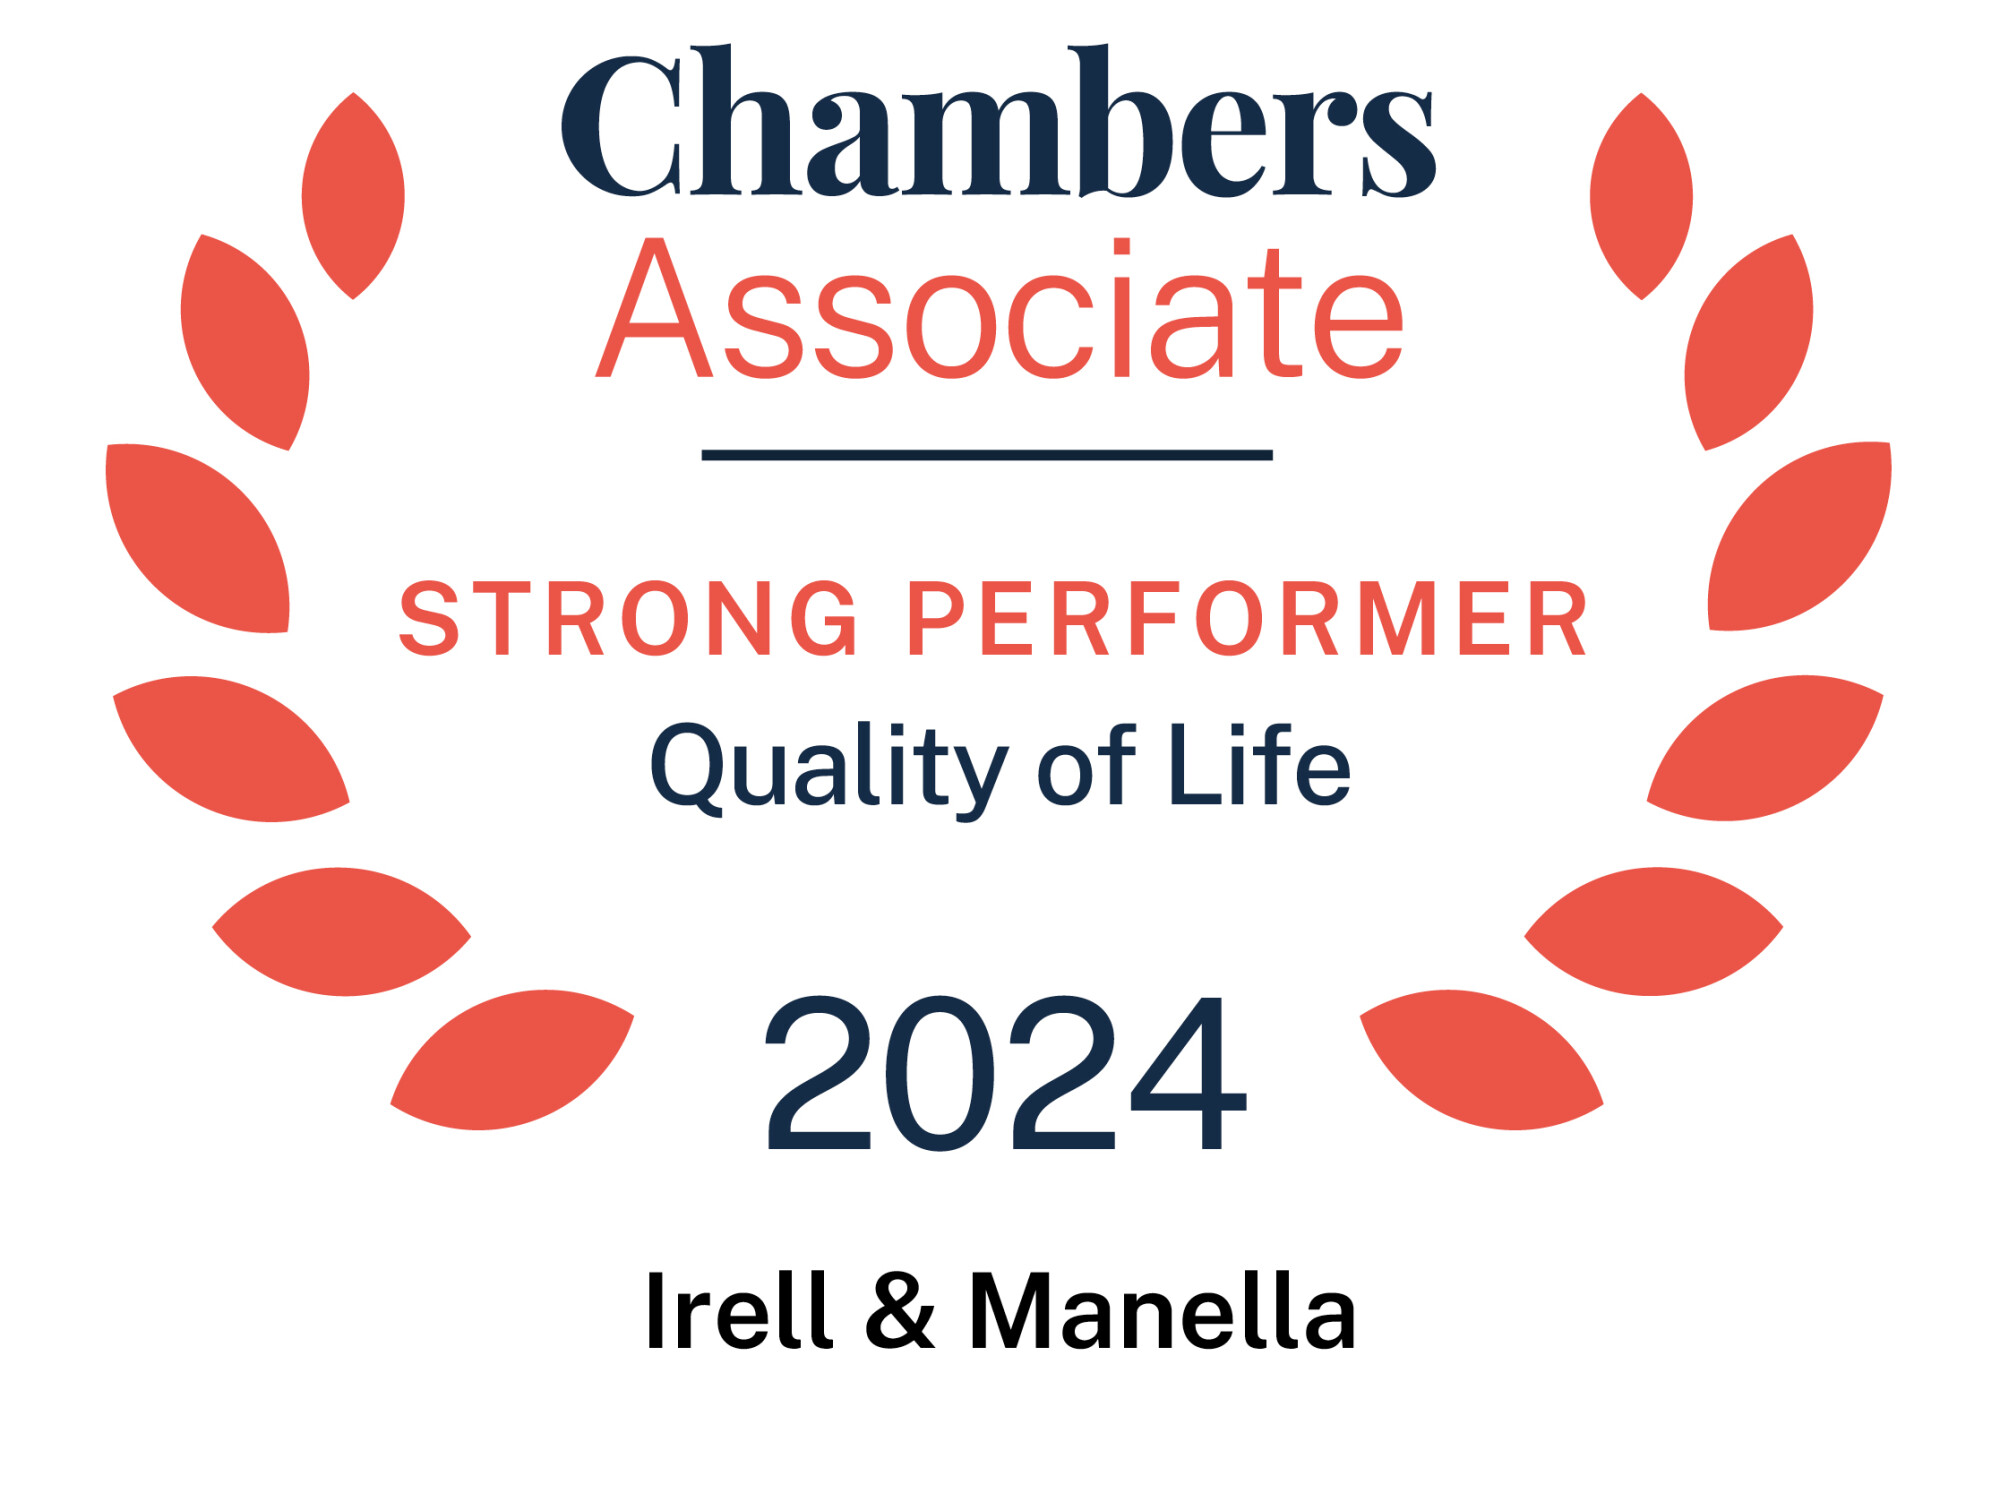 Chambers Associate Strong Performer Quality of Life 2024